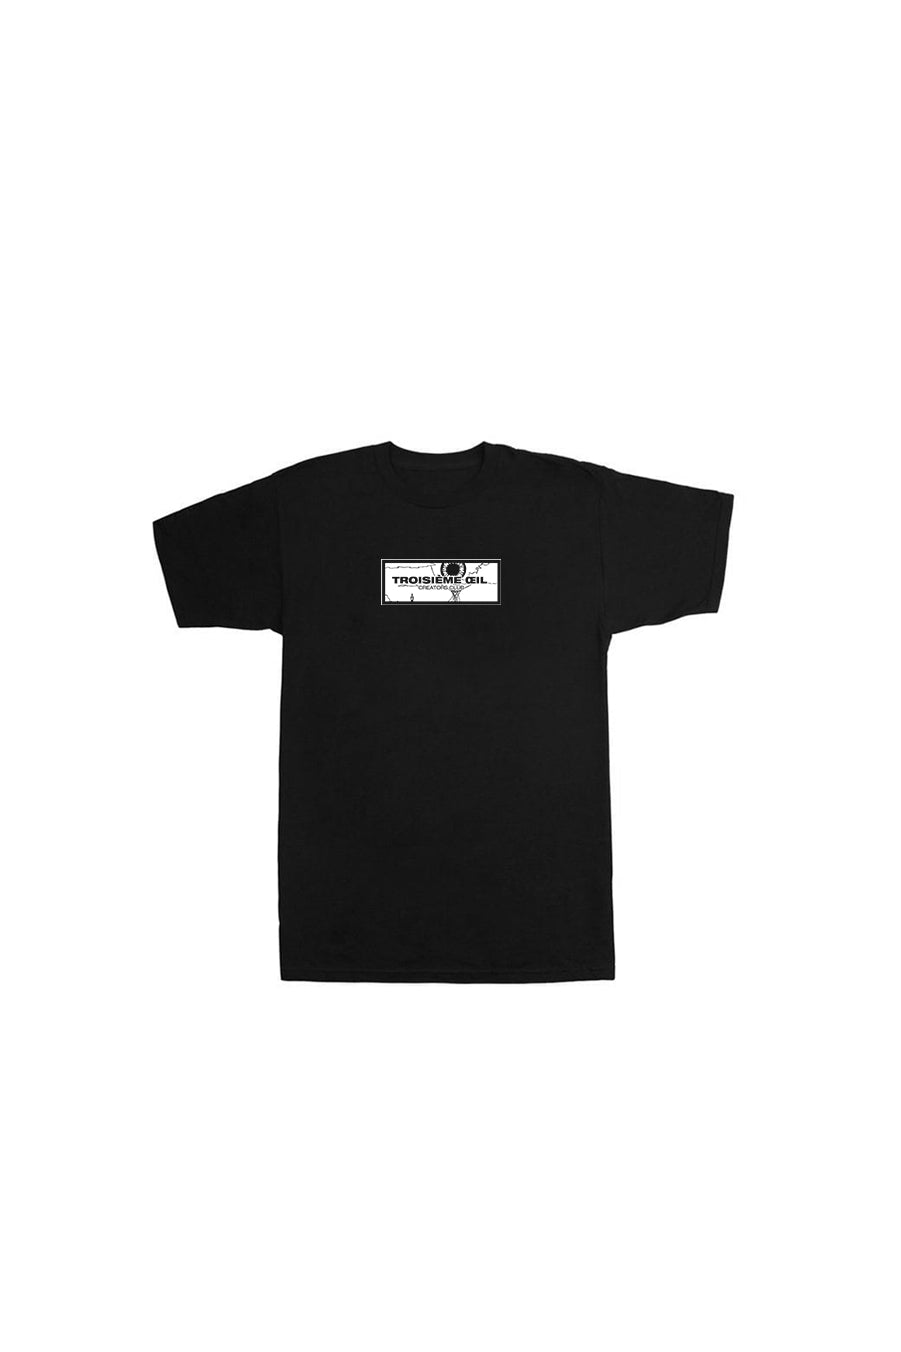 Tee Graphic - AW19